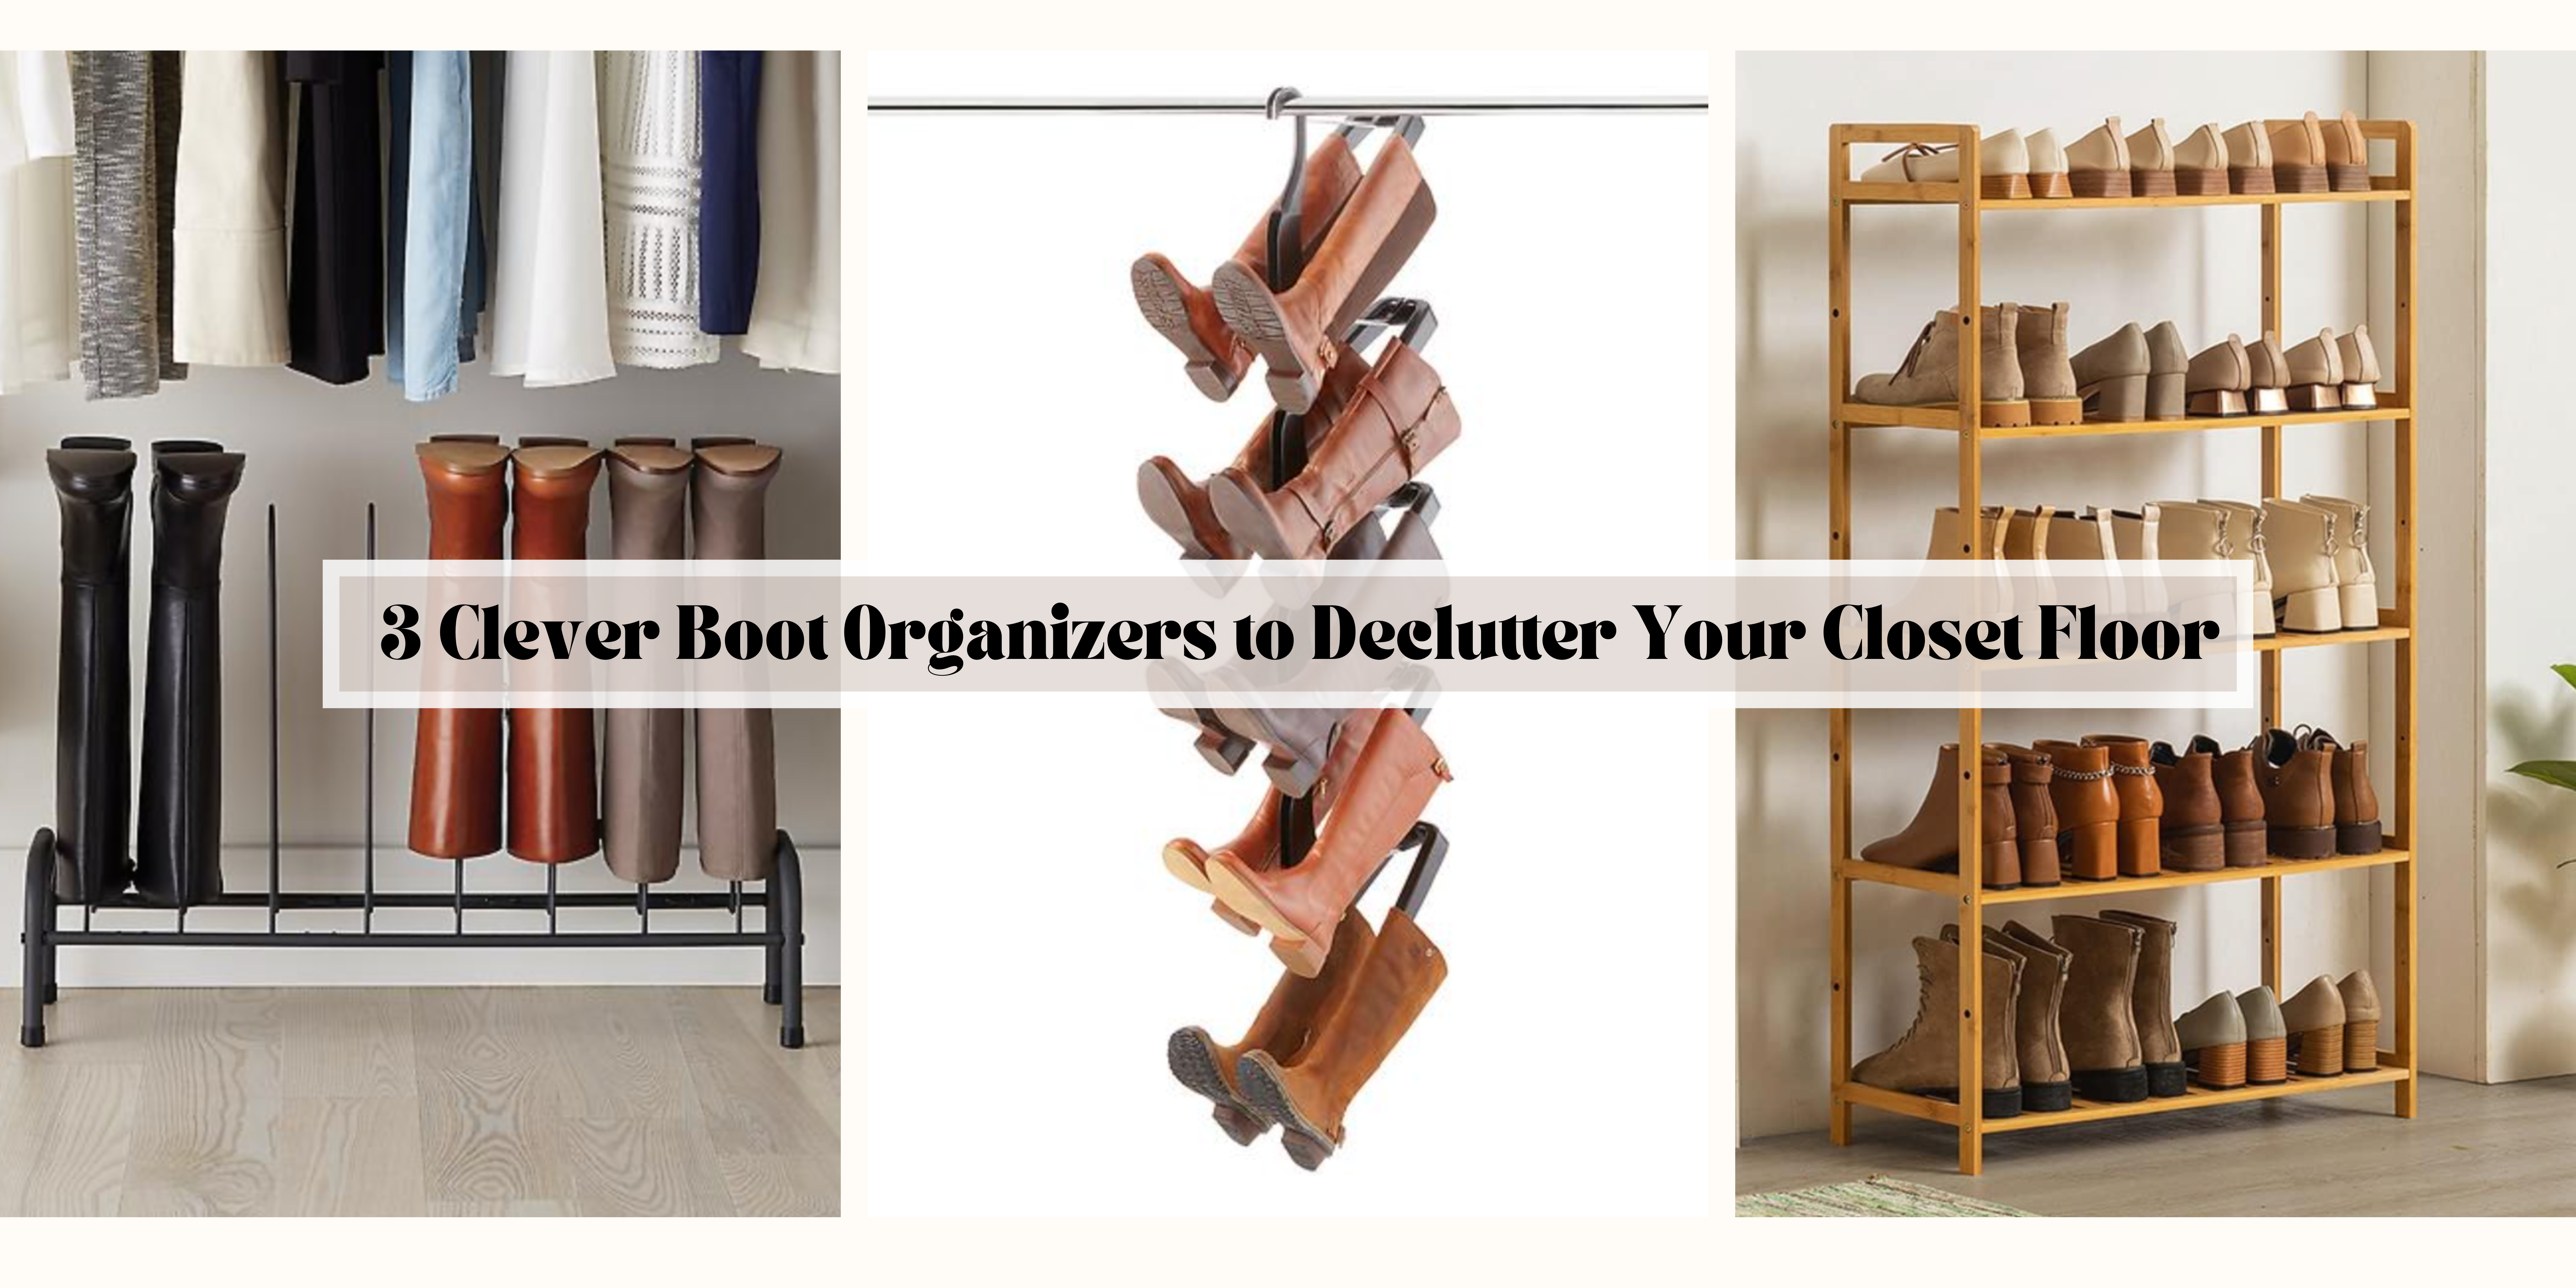 3 Clever Boot Organizers